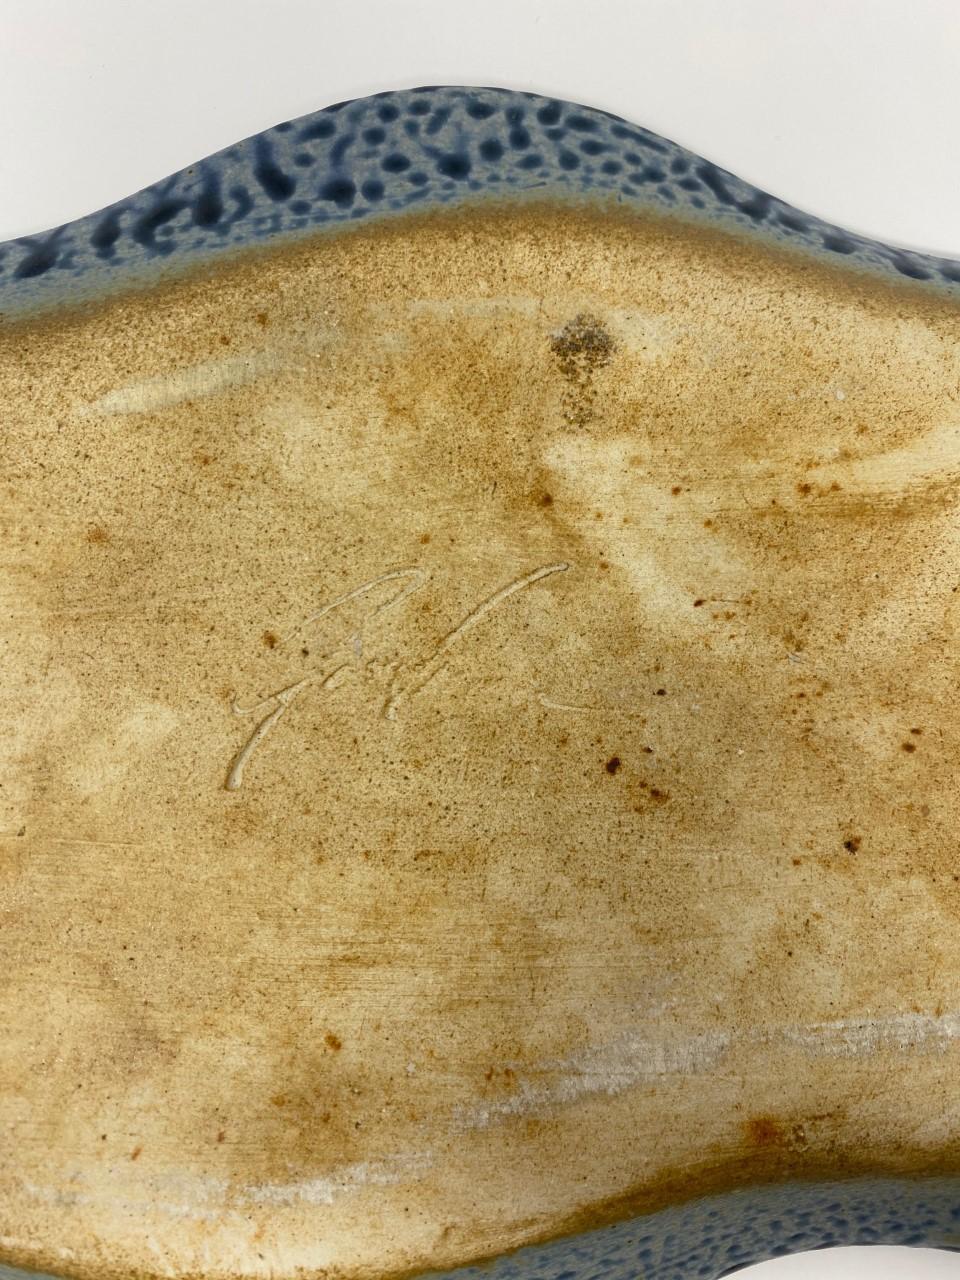 Vintage Ceramic Reptile Optic Style Glazed Platter In Good Condition For Sale In San Diego, CA